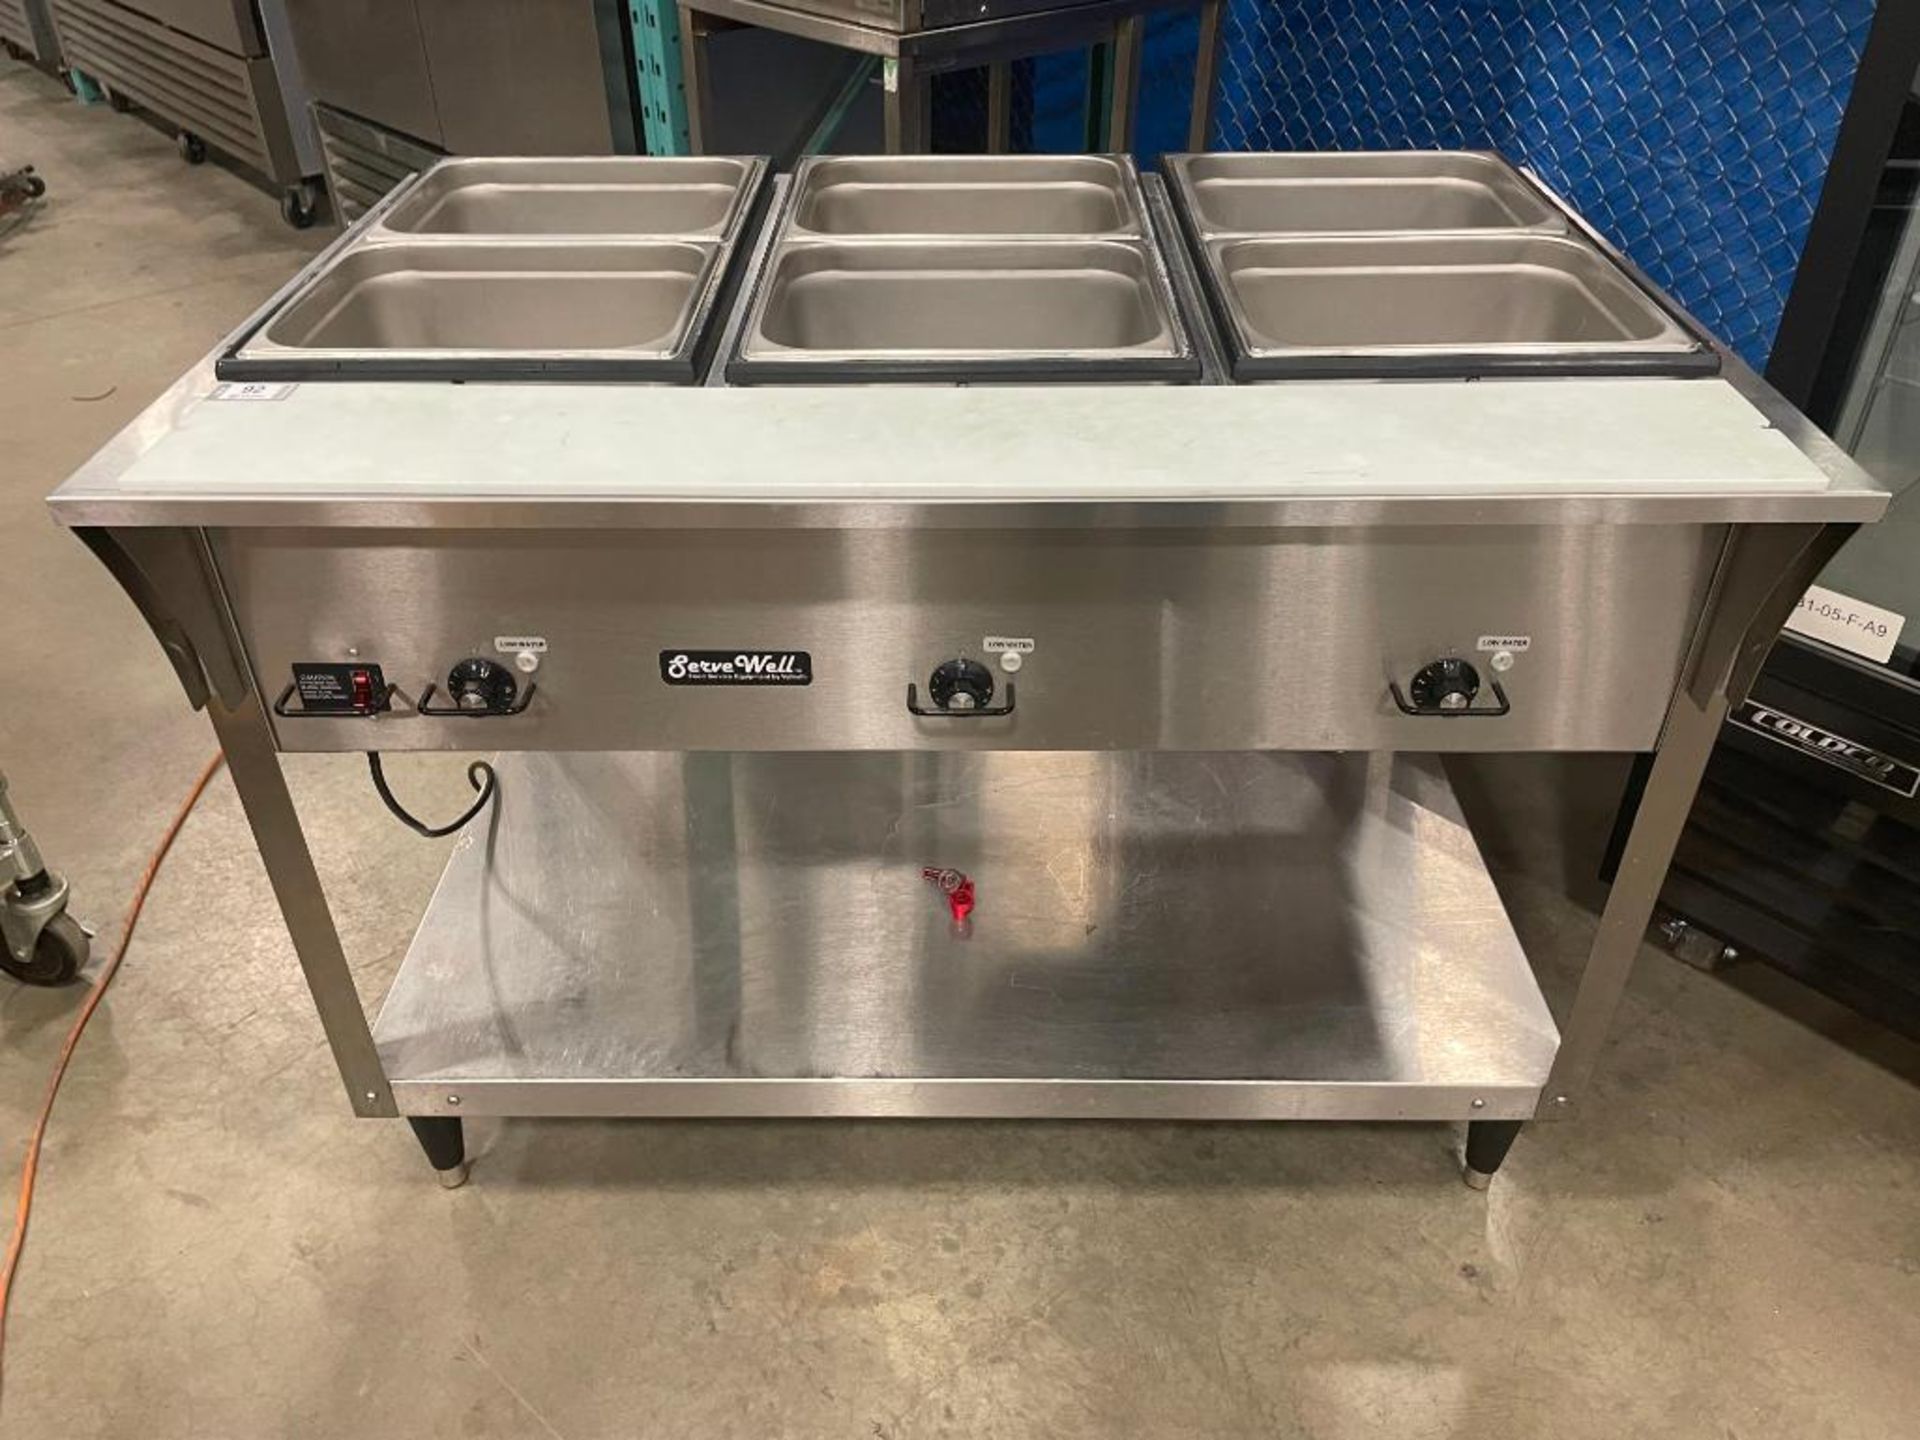 VOLLRATH SERVE WELL 3-WELL STEAM TABLE